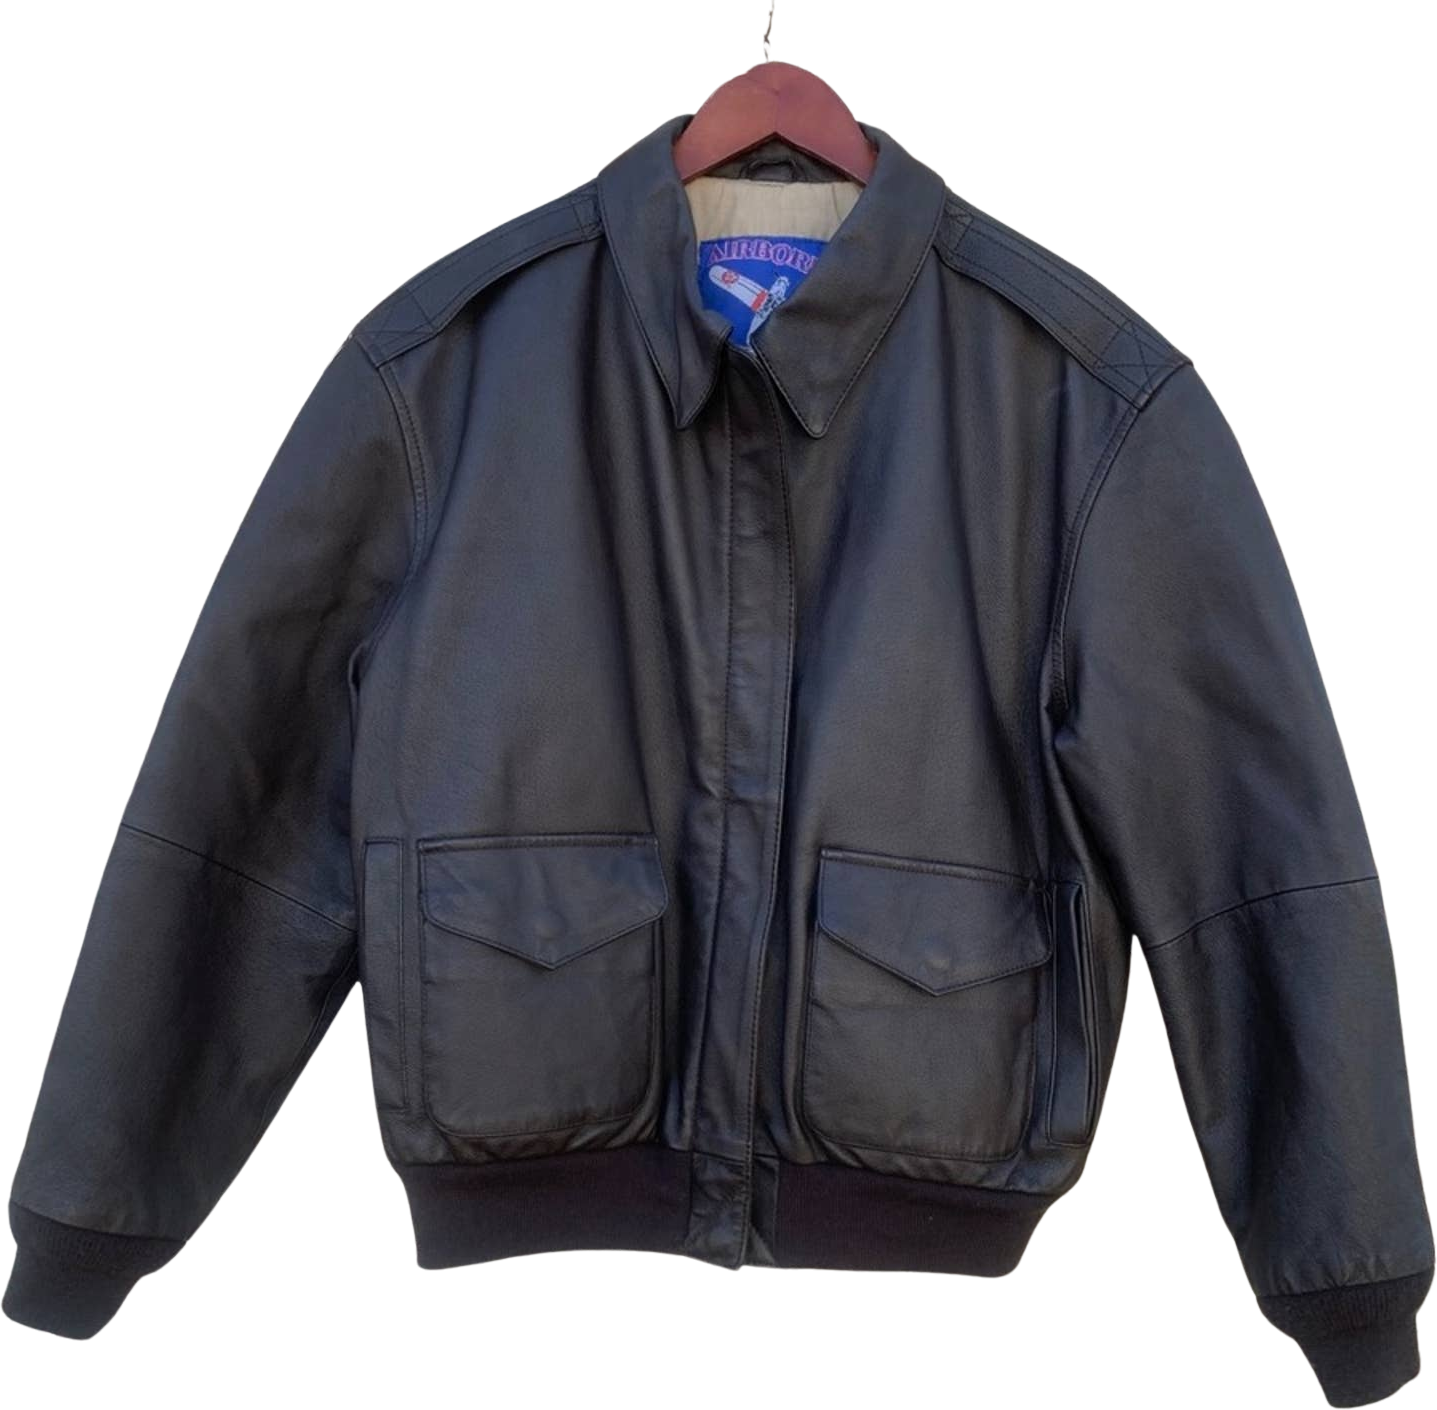 Vintage Airborne Air Force Leather Bomber Jacket by Airborne Leathers ...